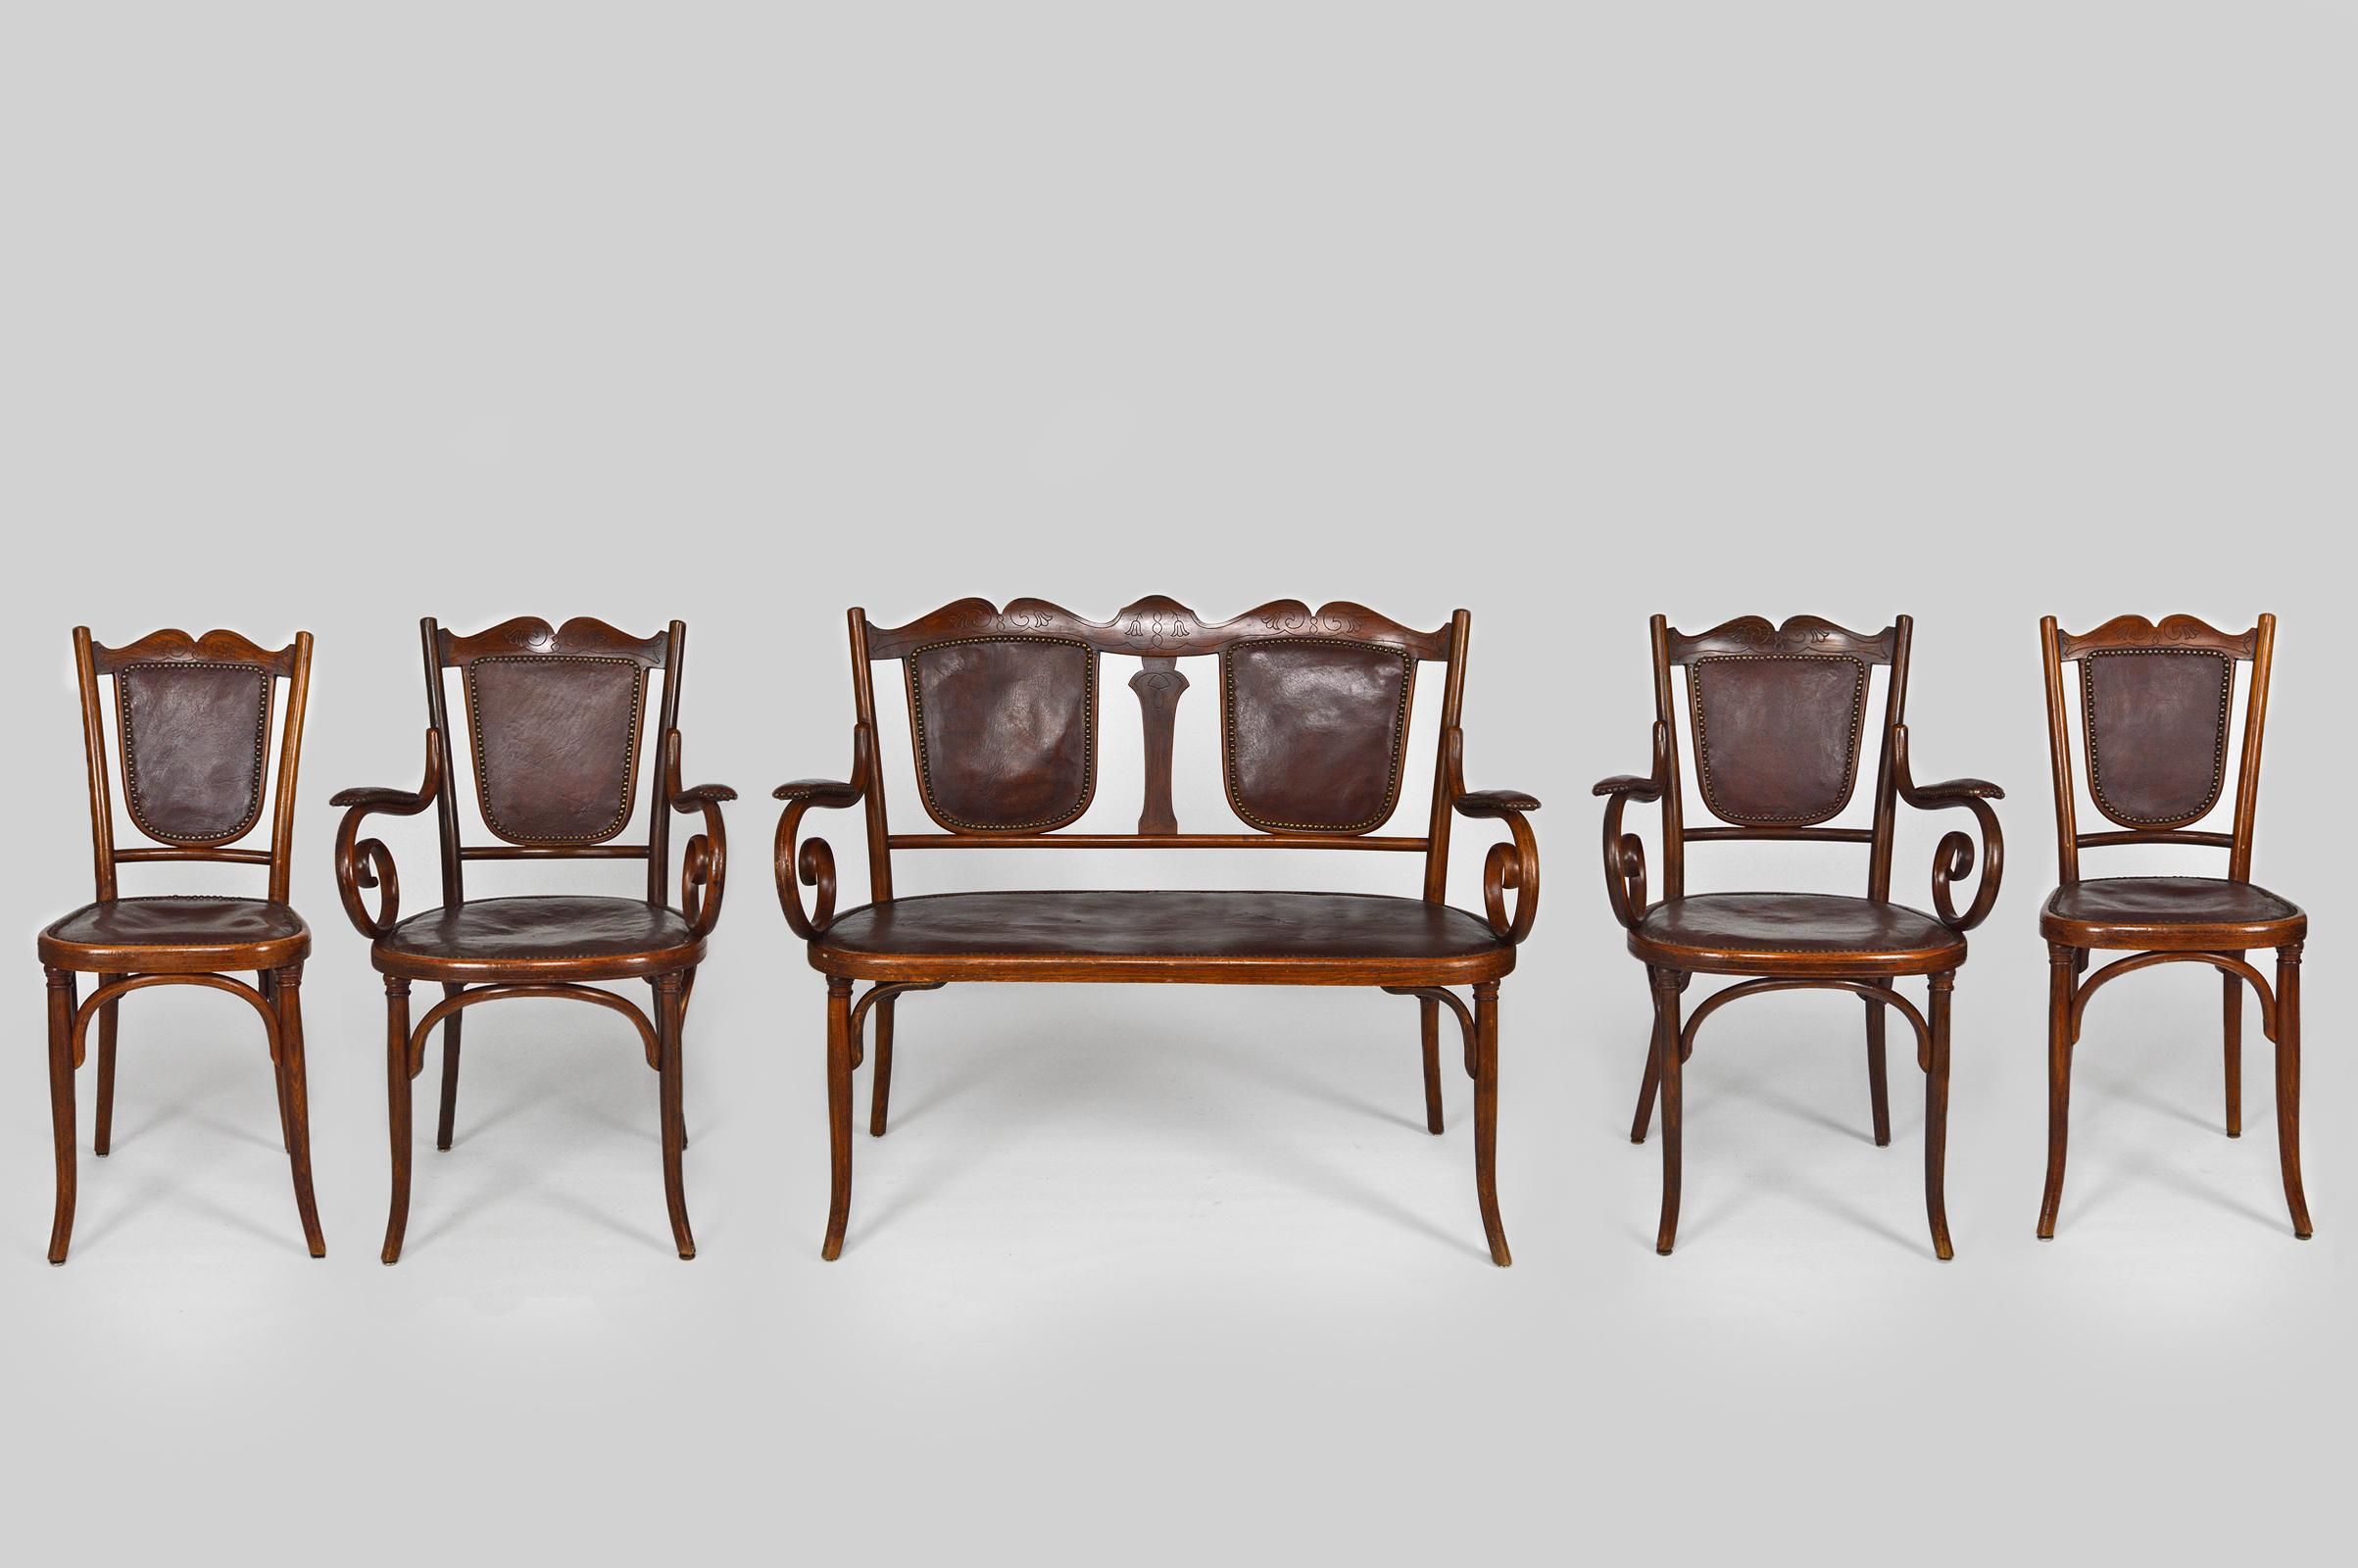 Superb and rare living room / salon set with bentwood structures (beech) and leather seats and backs.

Set composed of 5 elements: 1 sofa / canape / bench, 2 armchairs and 2 chairs.

Art Nouveau, Bohemia (current Czech Republic), around